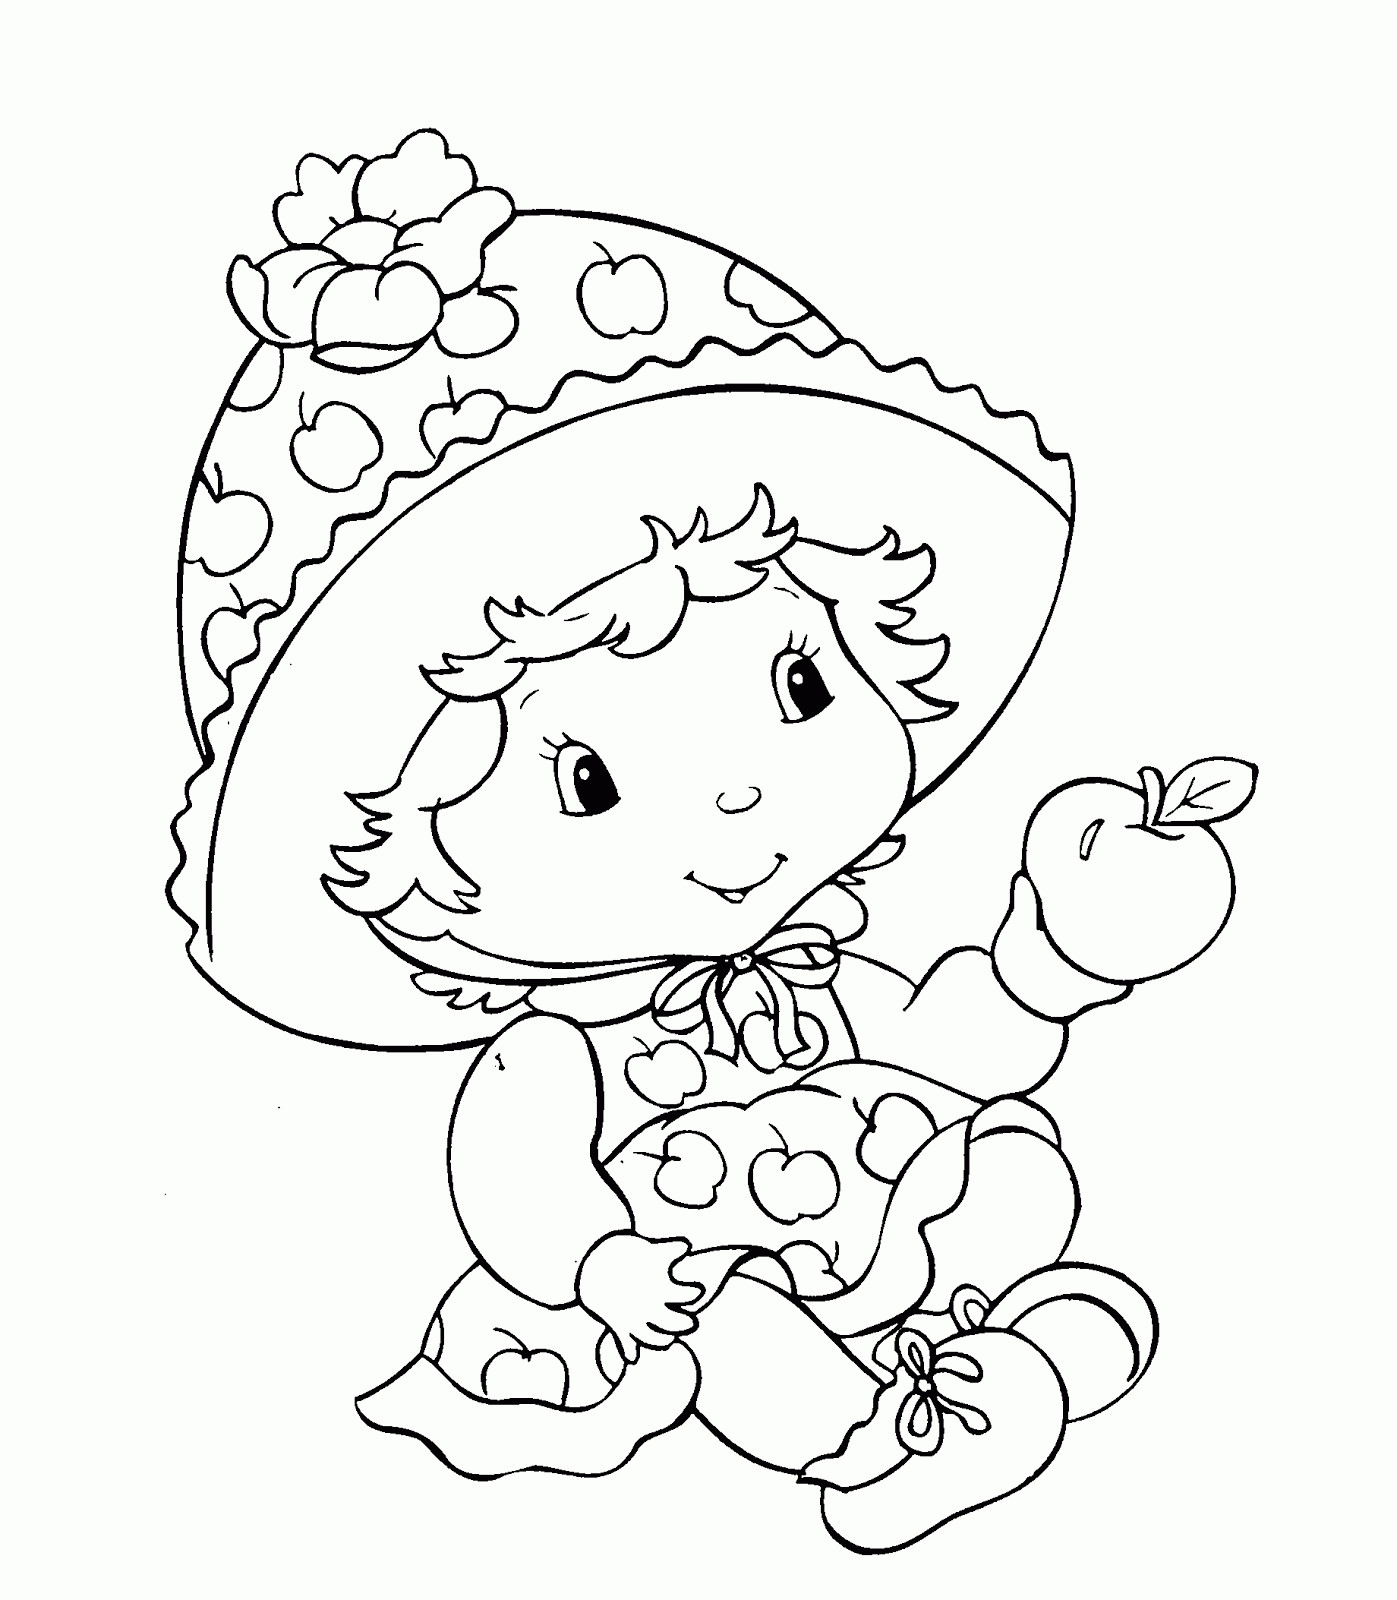 Baby Coloring Pages For Girls
 CuteColoring Cute Coloring ☺♥